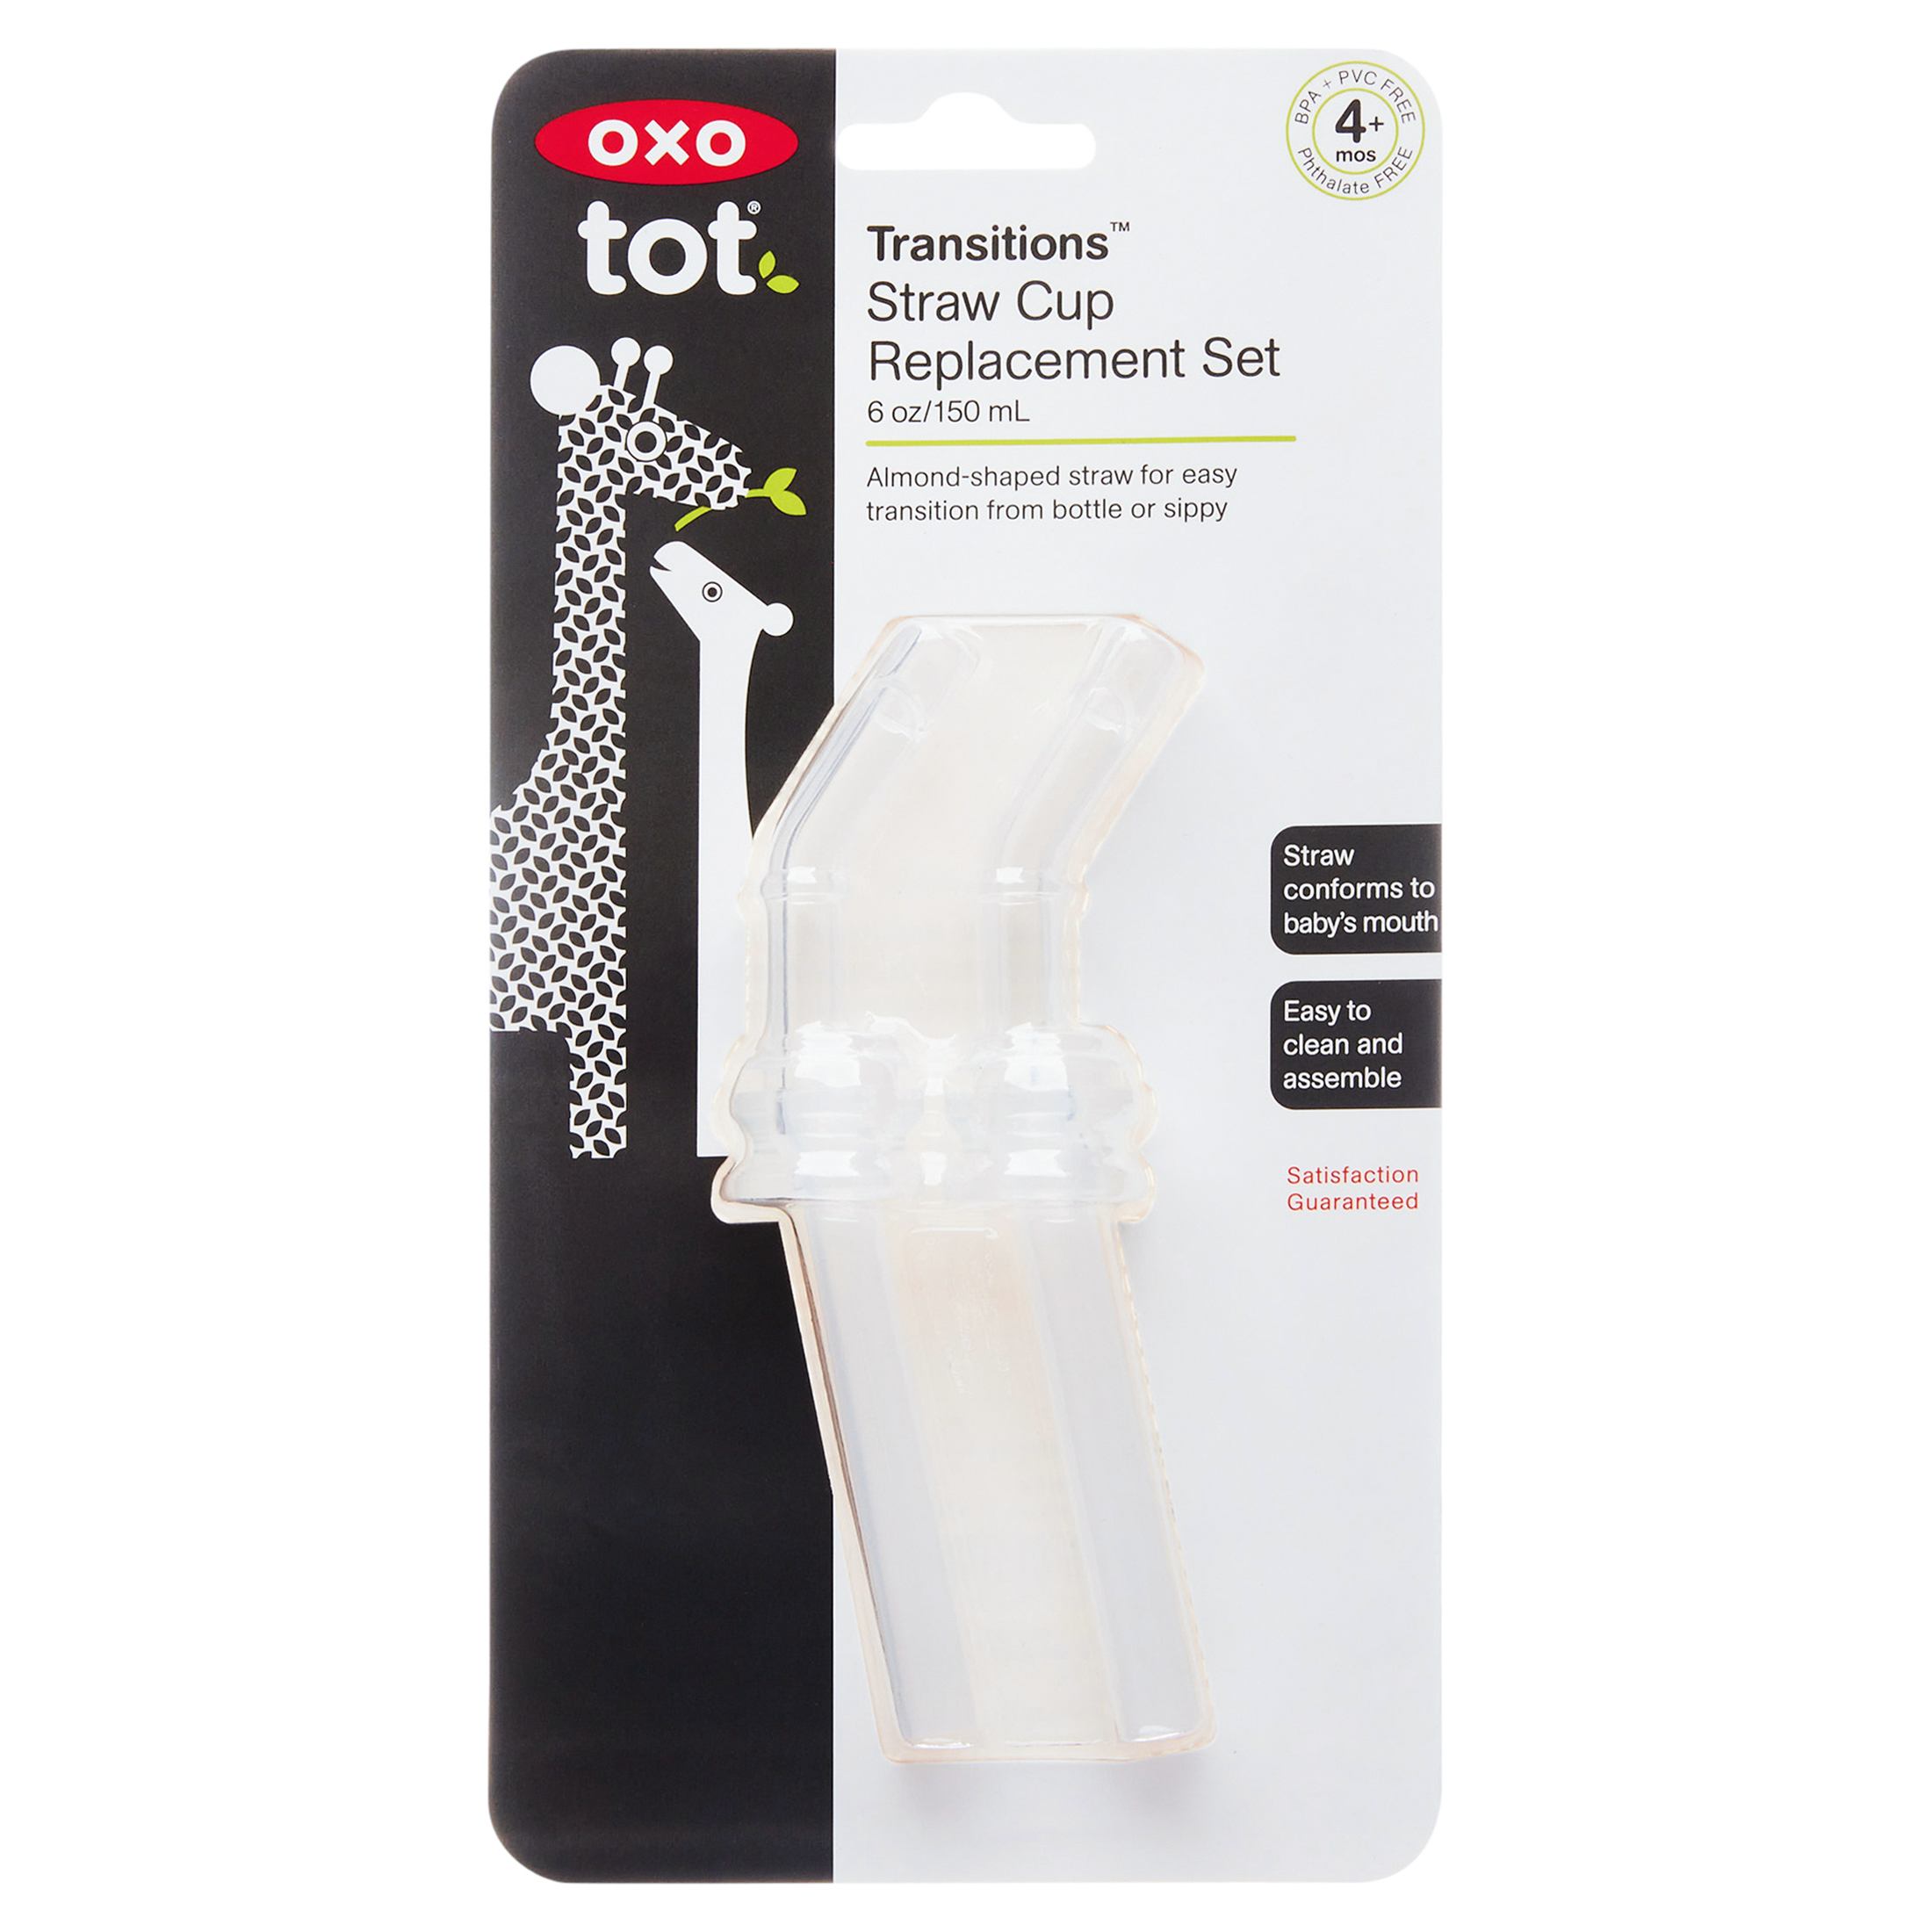 OXO Tot 2-Pack Replacement Straw Set - 6 ounce - image 1 of 6